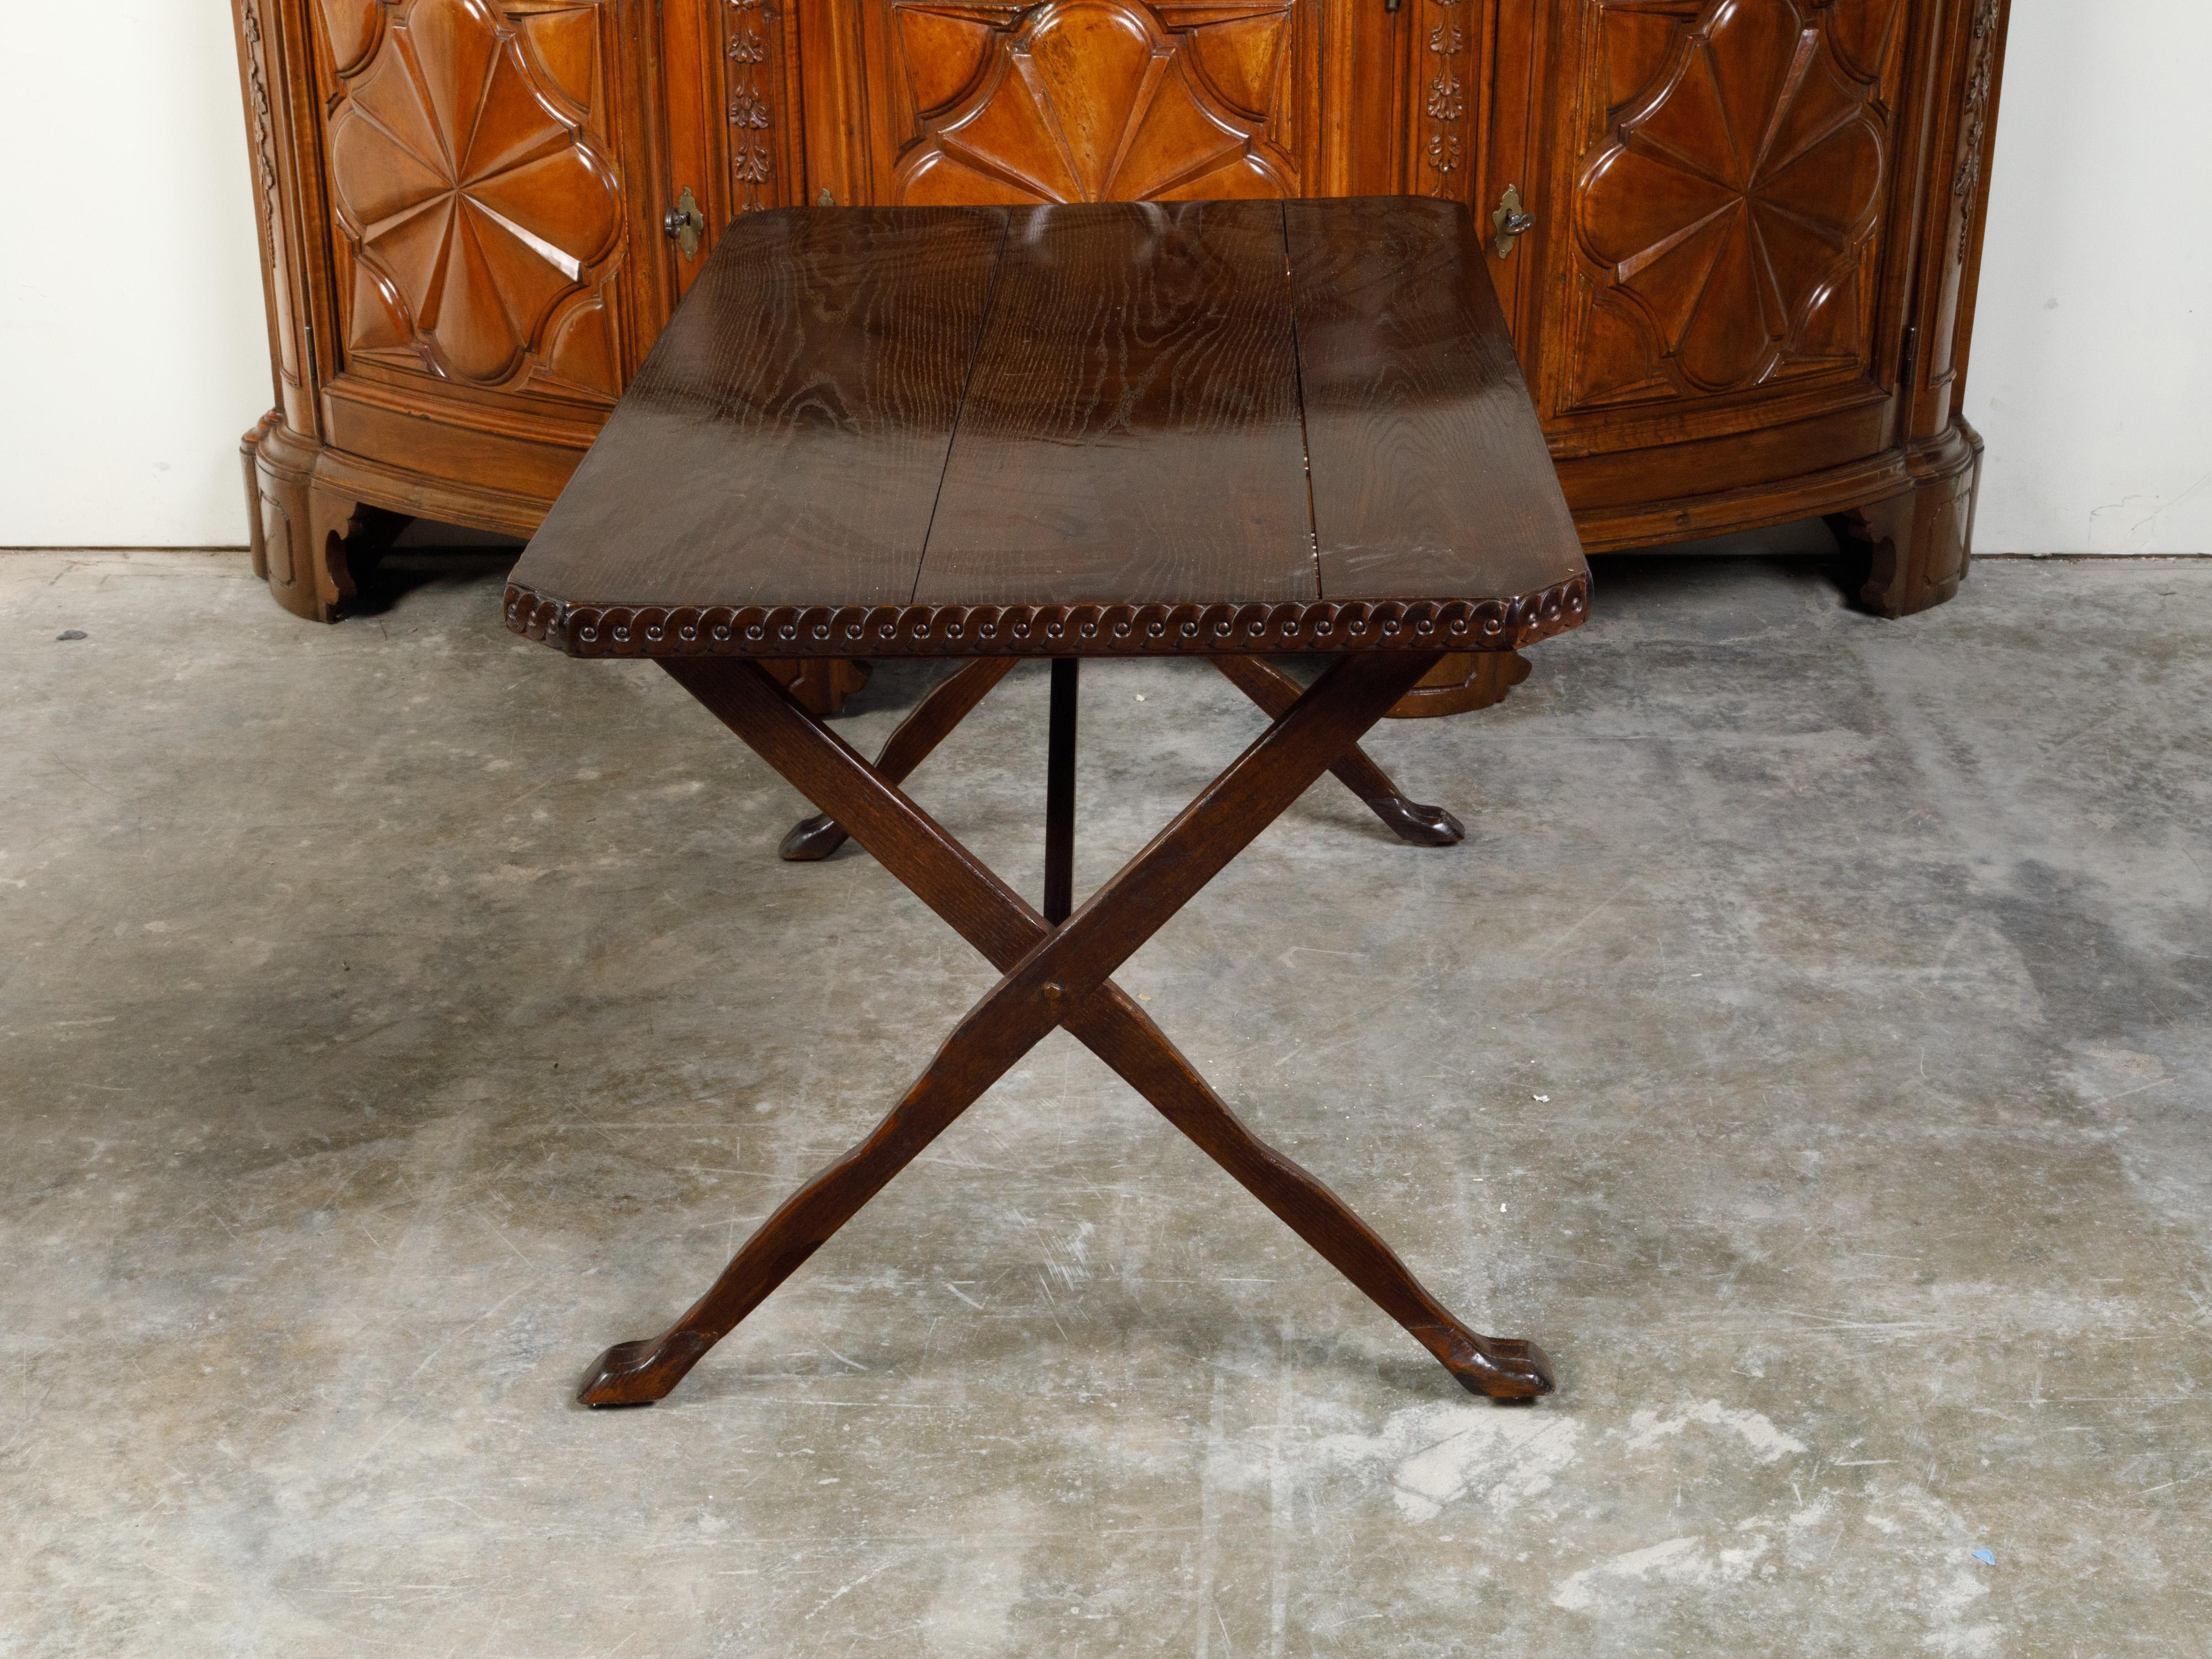 Italian 19th Century Oak Side Table with Carved Guilloche Frieze and X-Form Legs For Sale 2